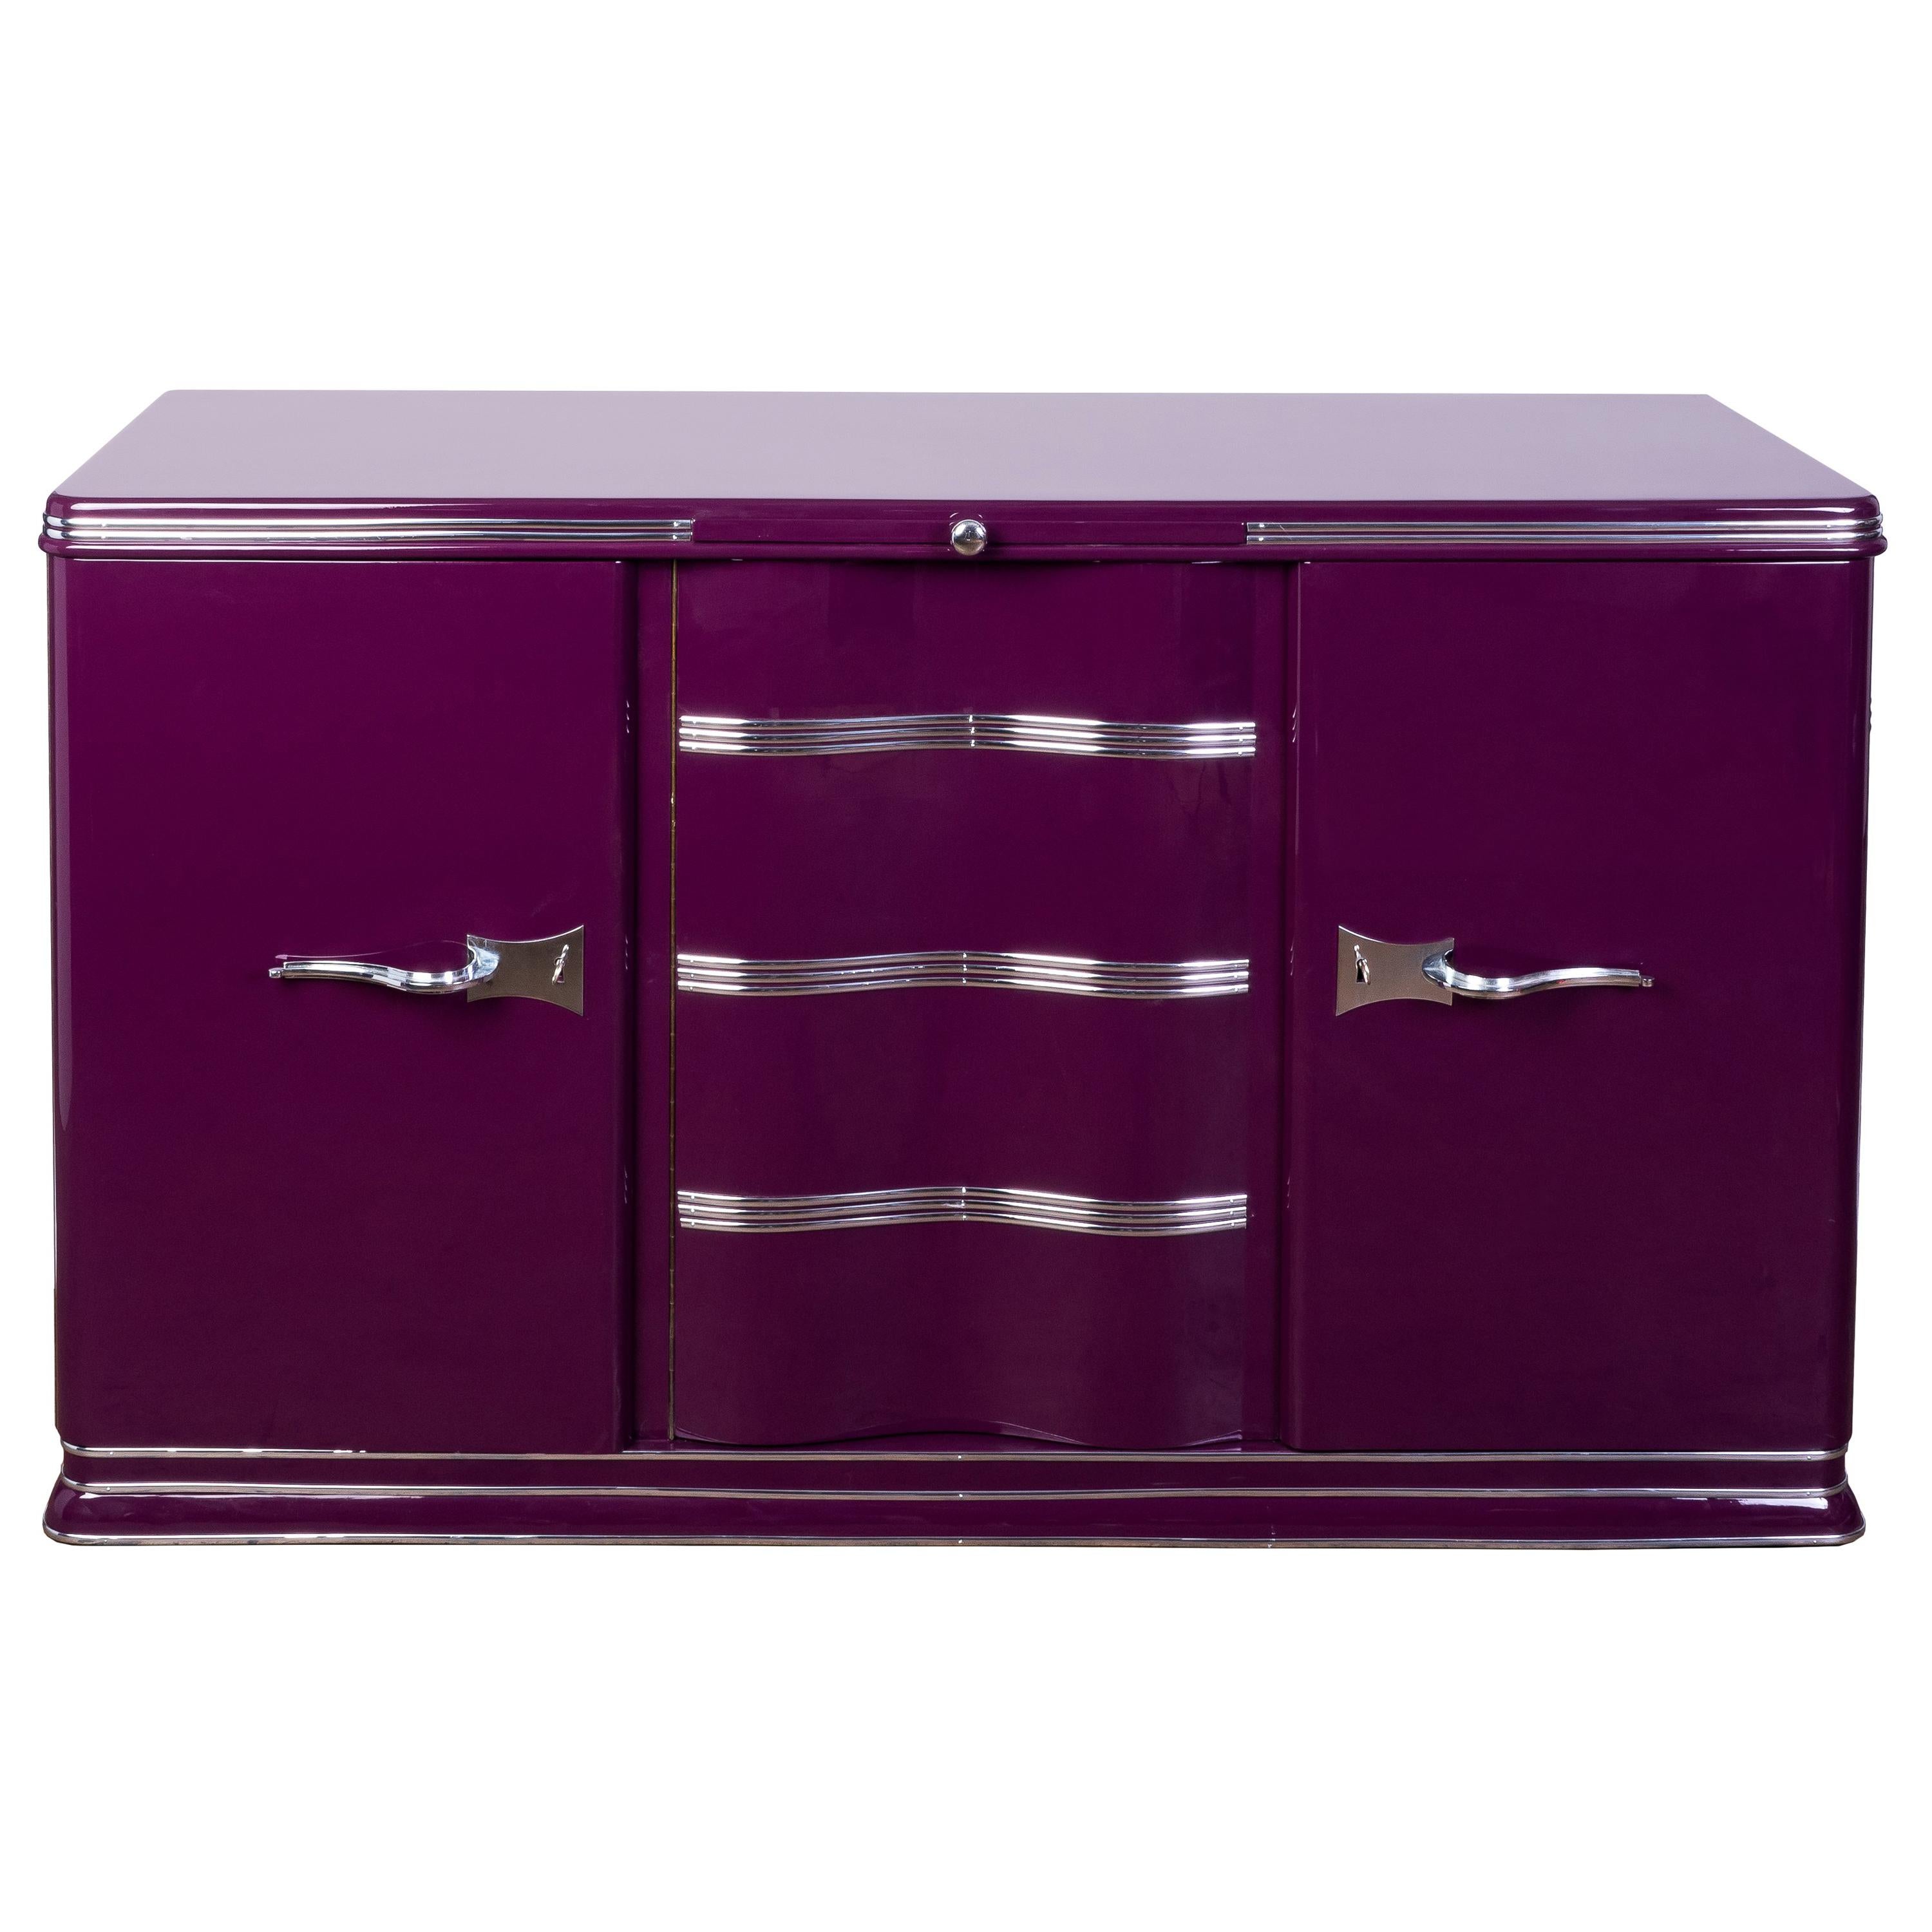 Luxe Art Deco Sideboard in Lilac